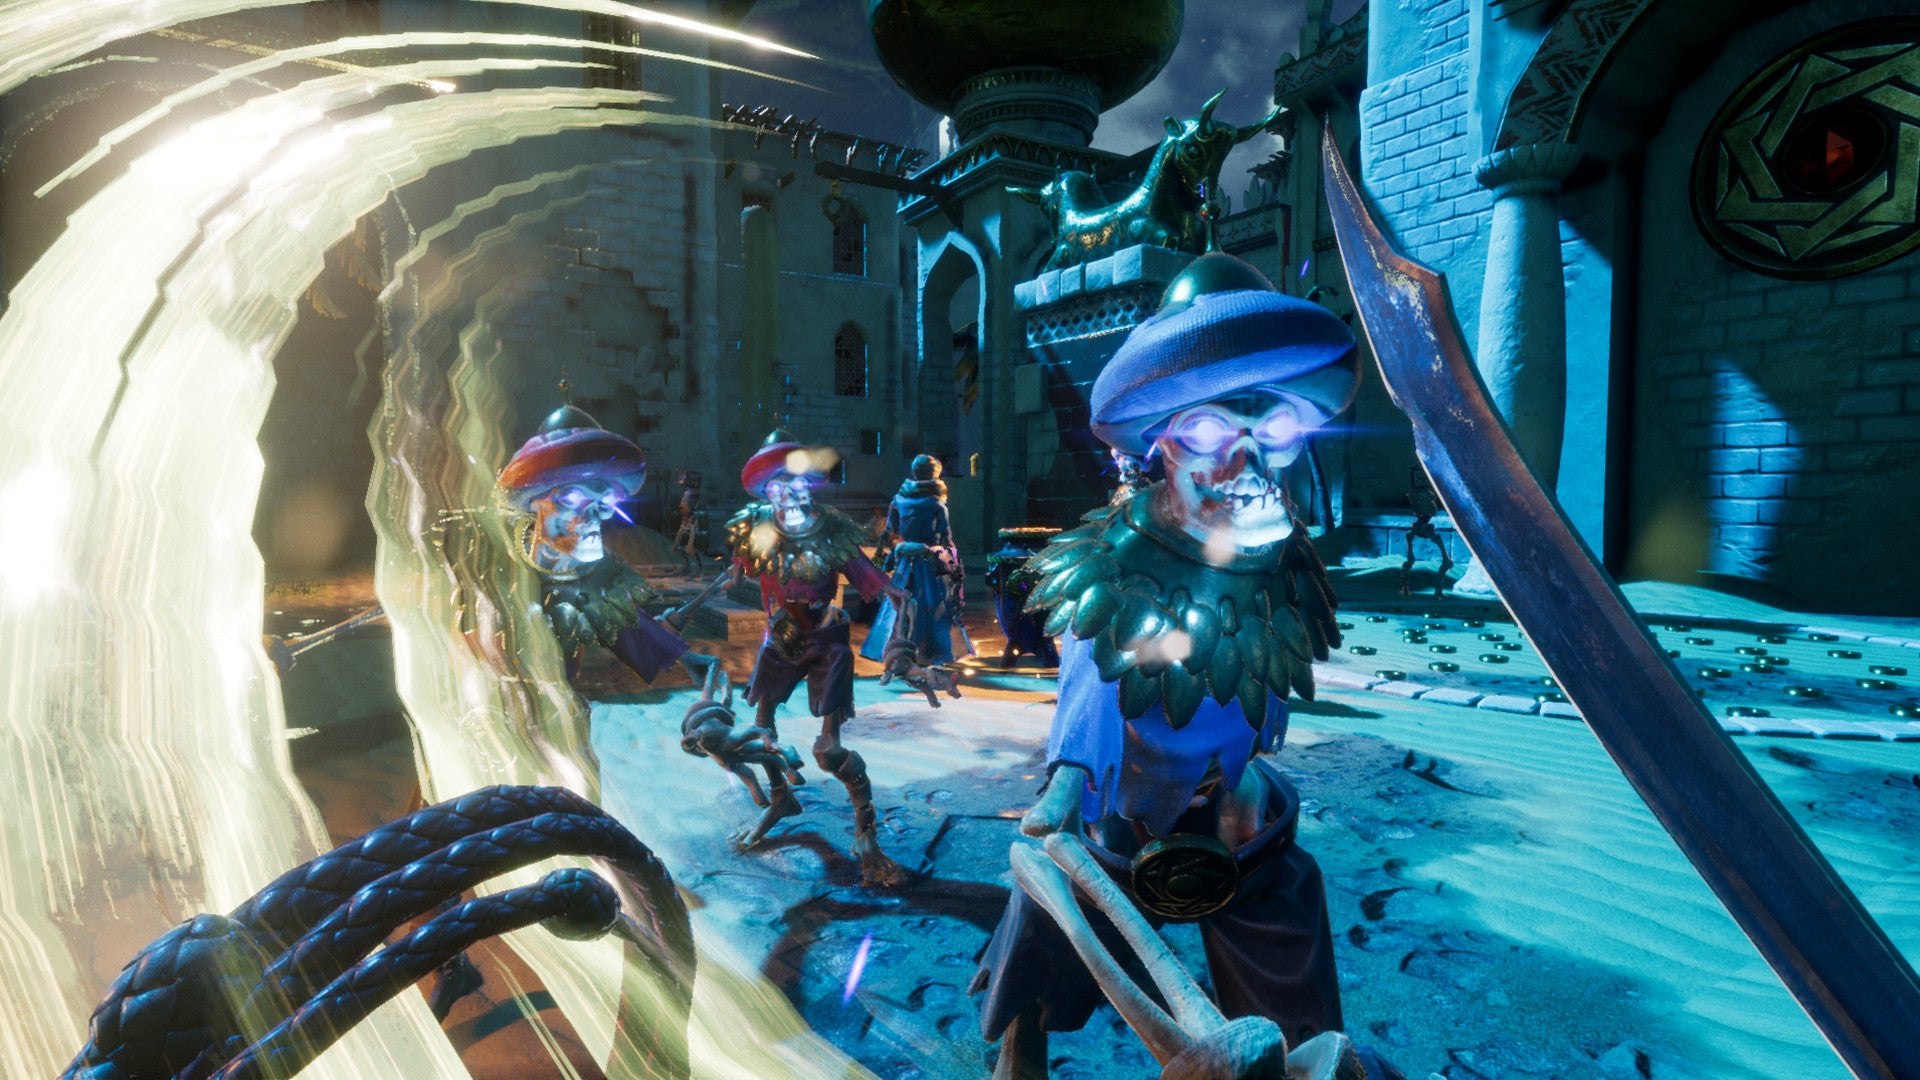 Fighting skeletons in a City of Brass screenshot.